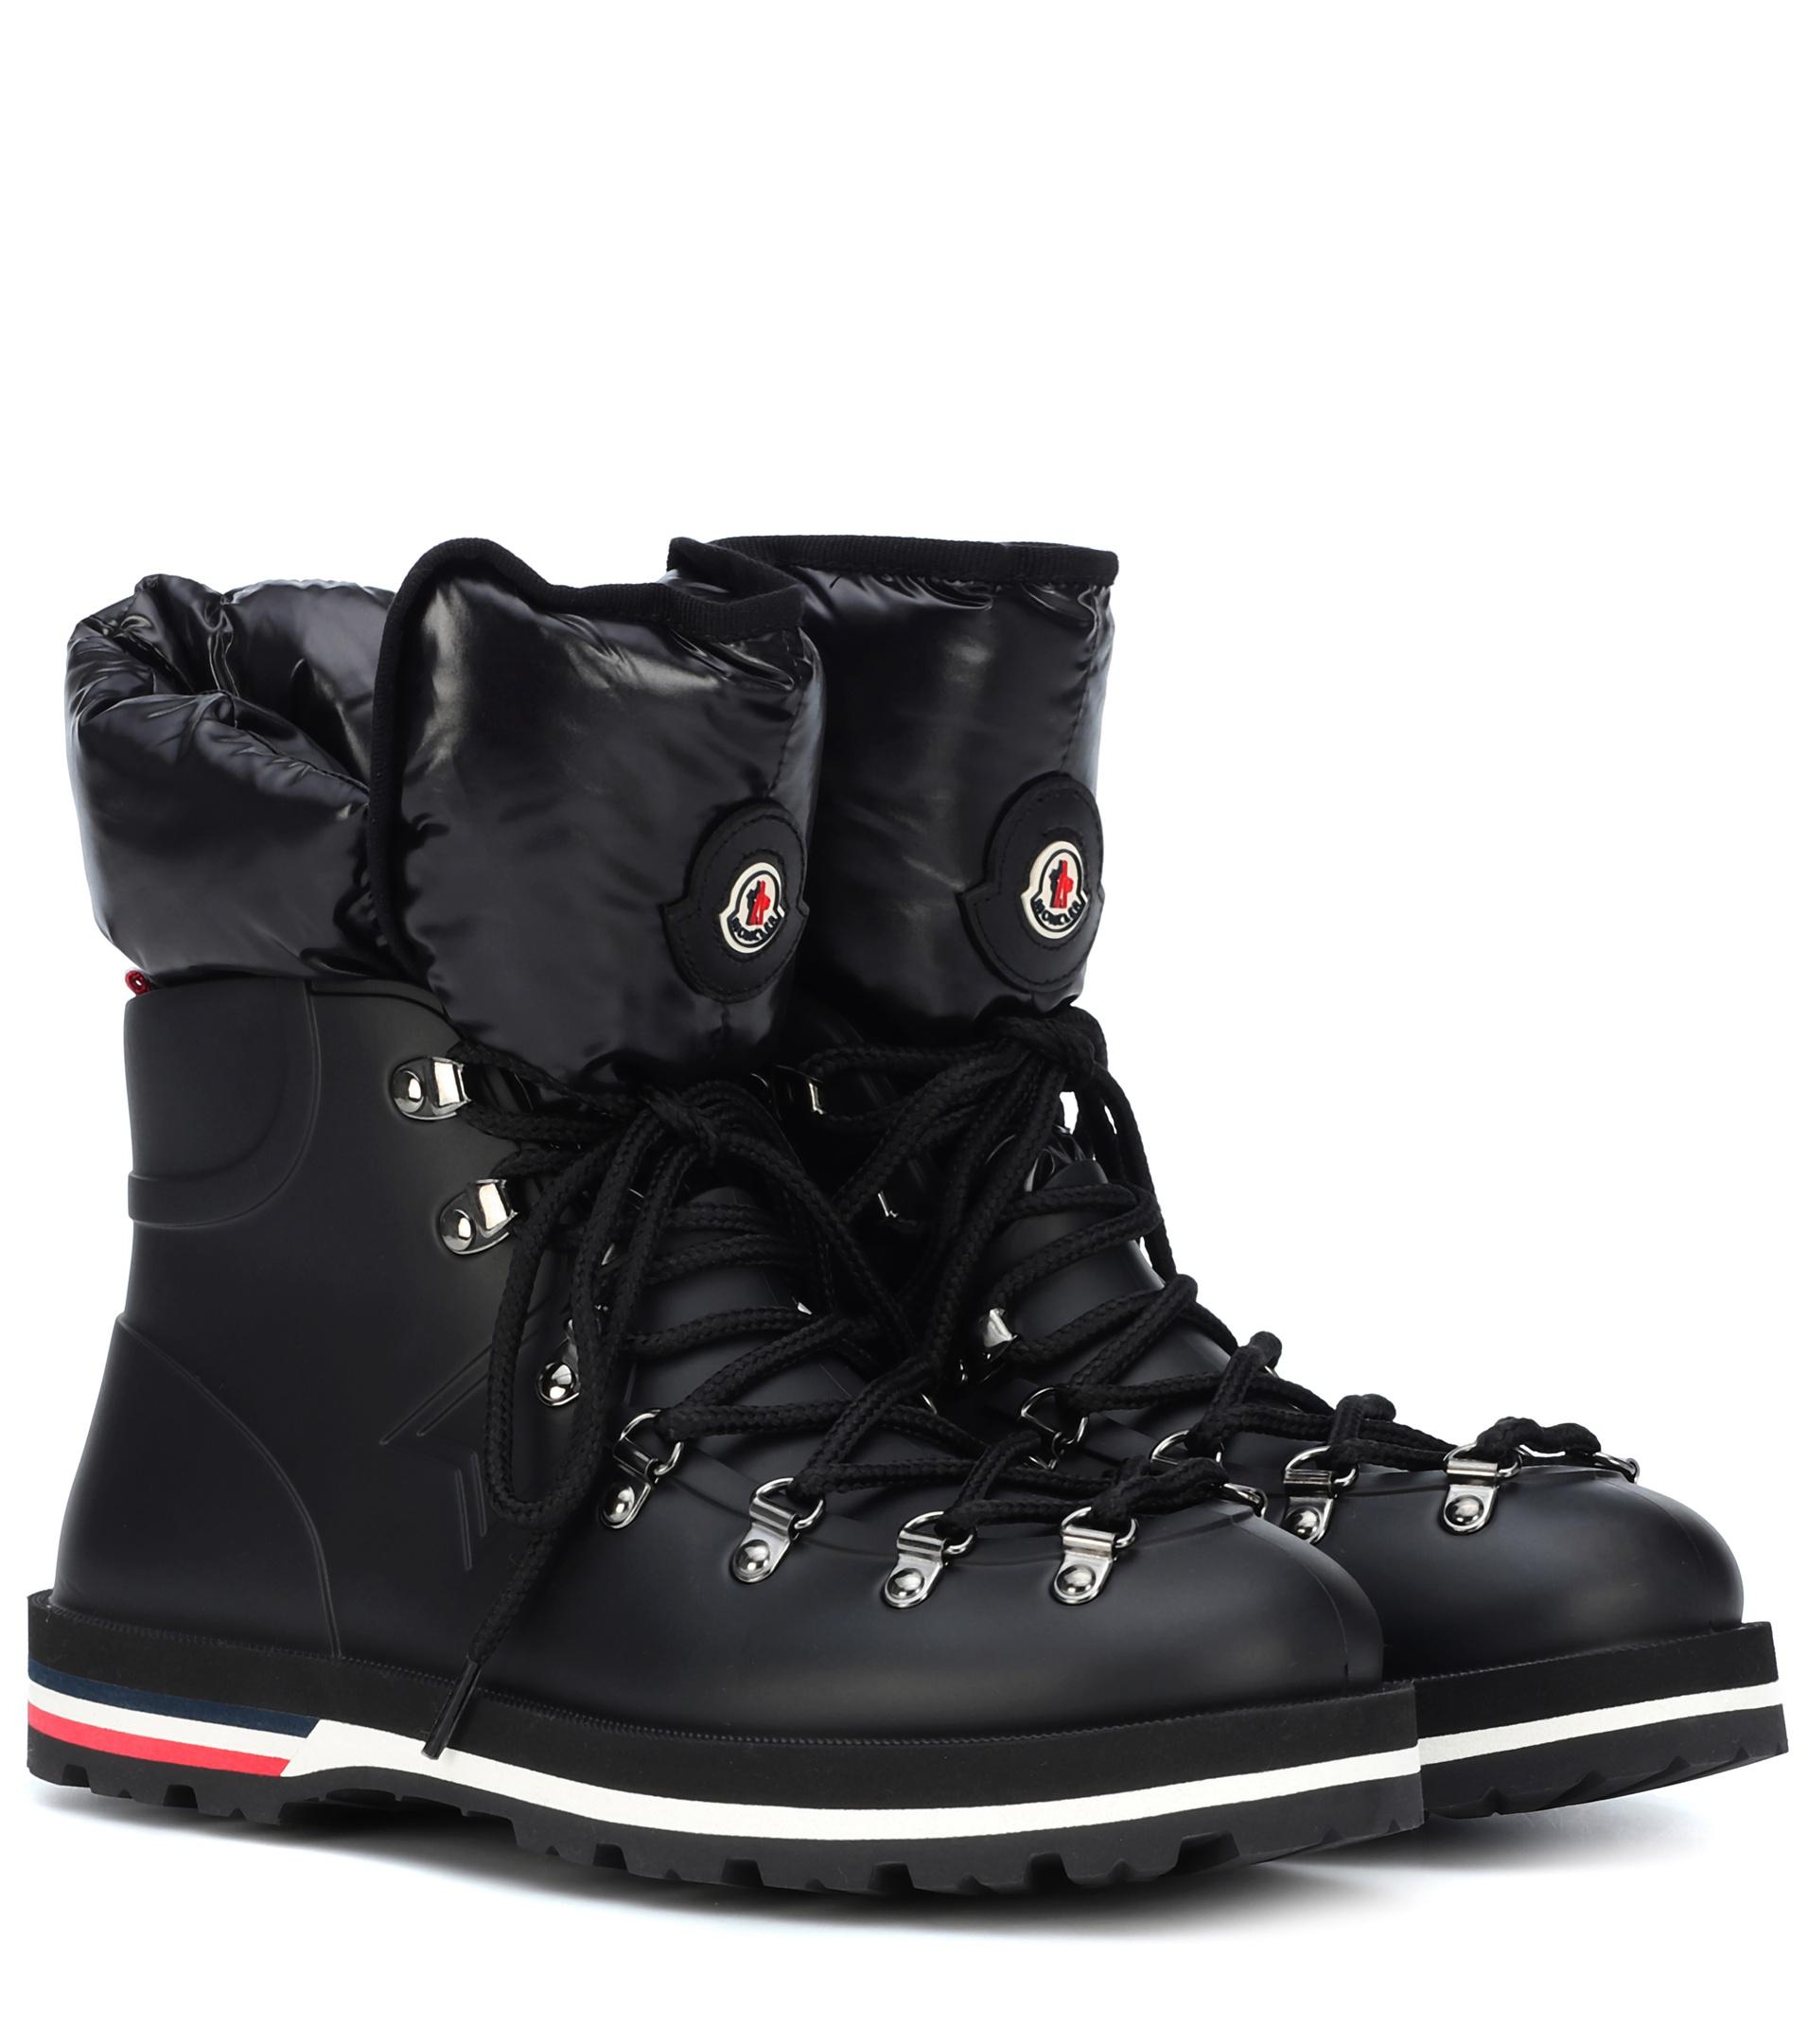 Moncler Inaya Rubber Boots in Black - Lyst